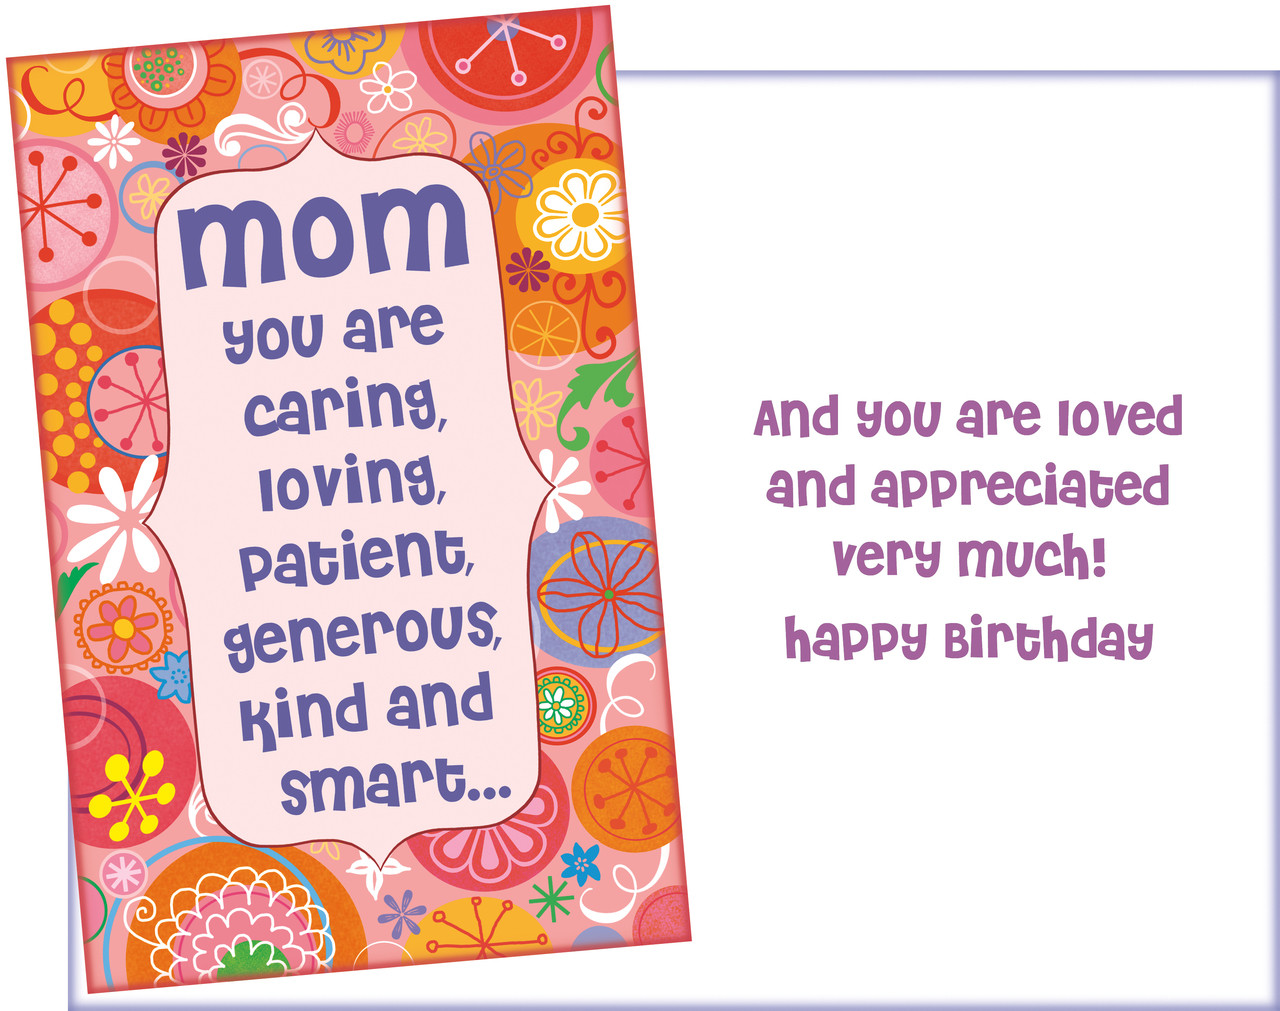 95137 six birthday mom cards with six envelopes, $1.80 for six